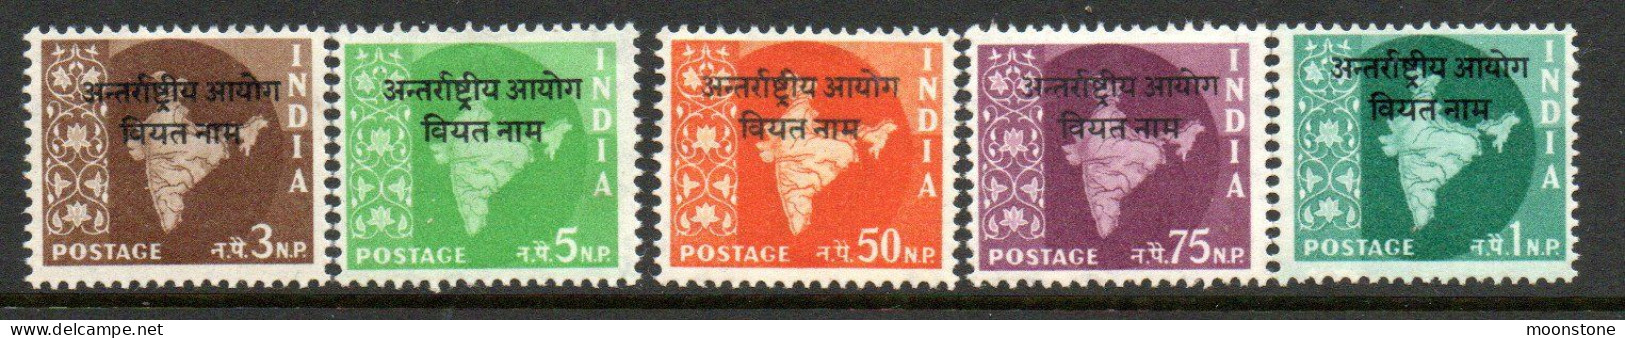 India 1960 Commission In Indochina Vietnam Overprint On Map Part Set Of 5  (missing 2np), MNH, SG N43/8 (E) - Military Service Stamp